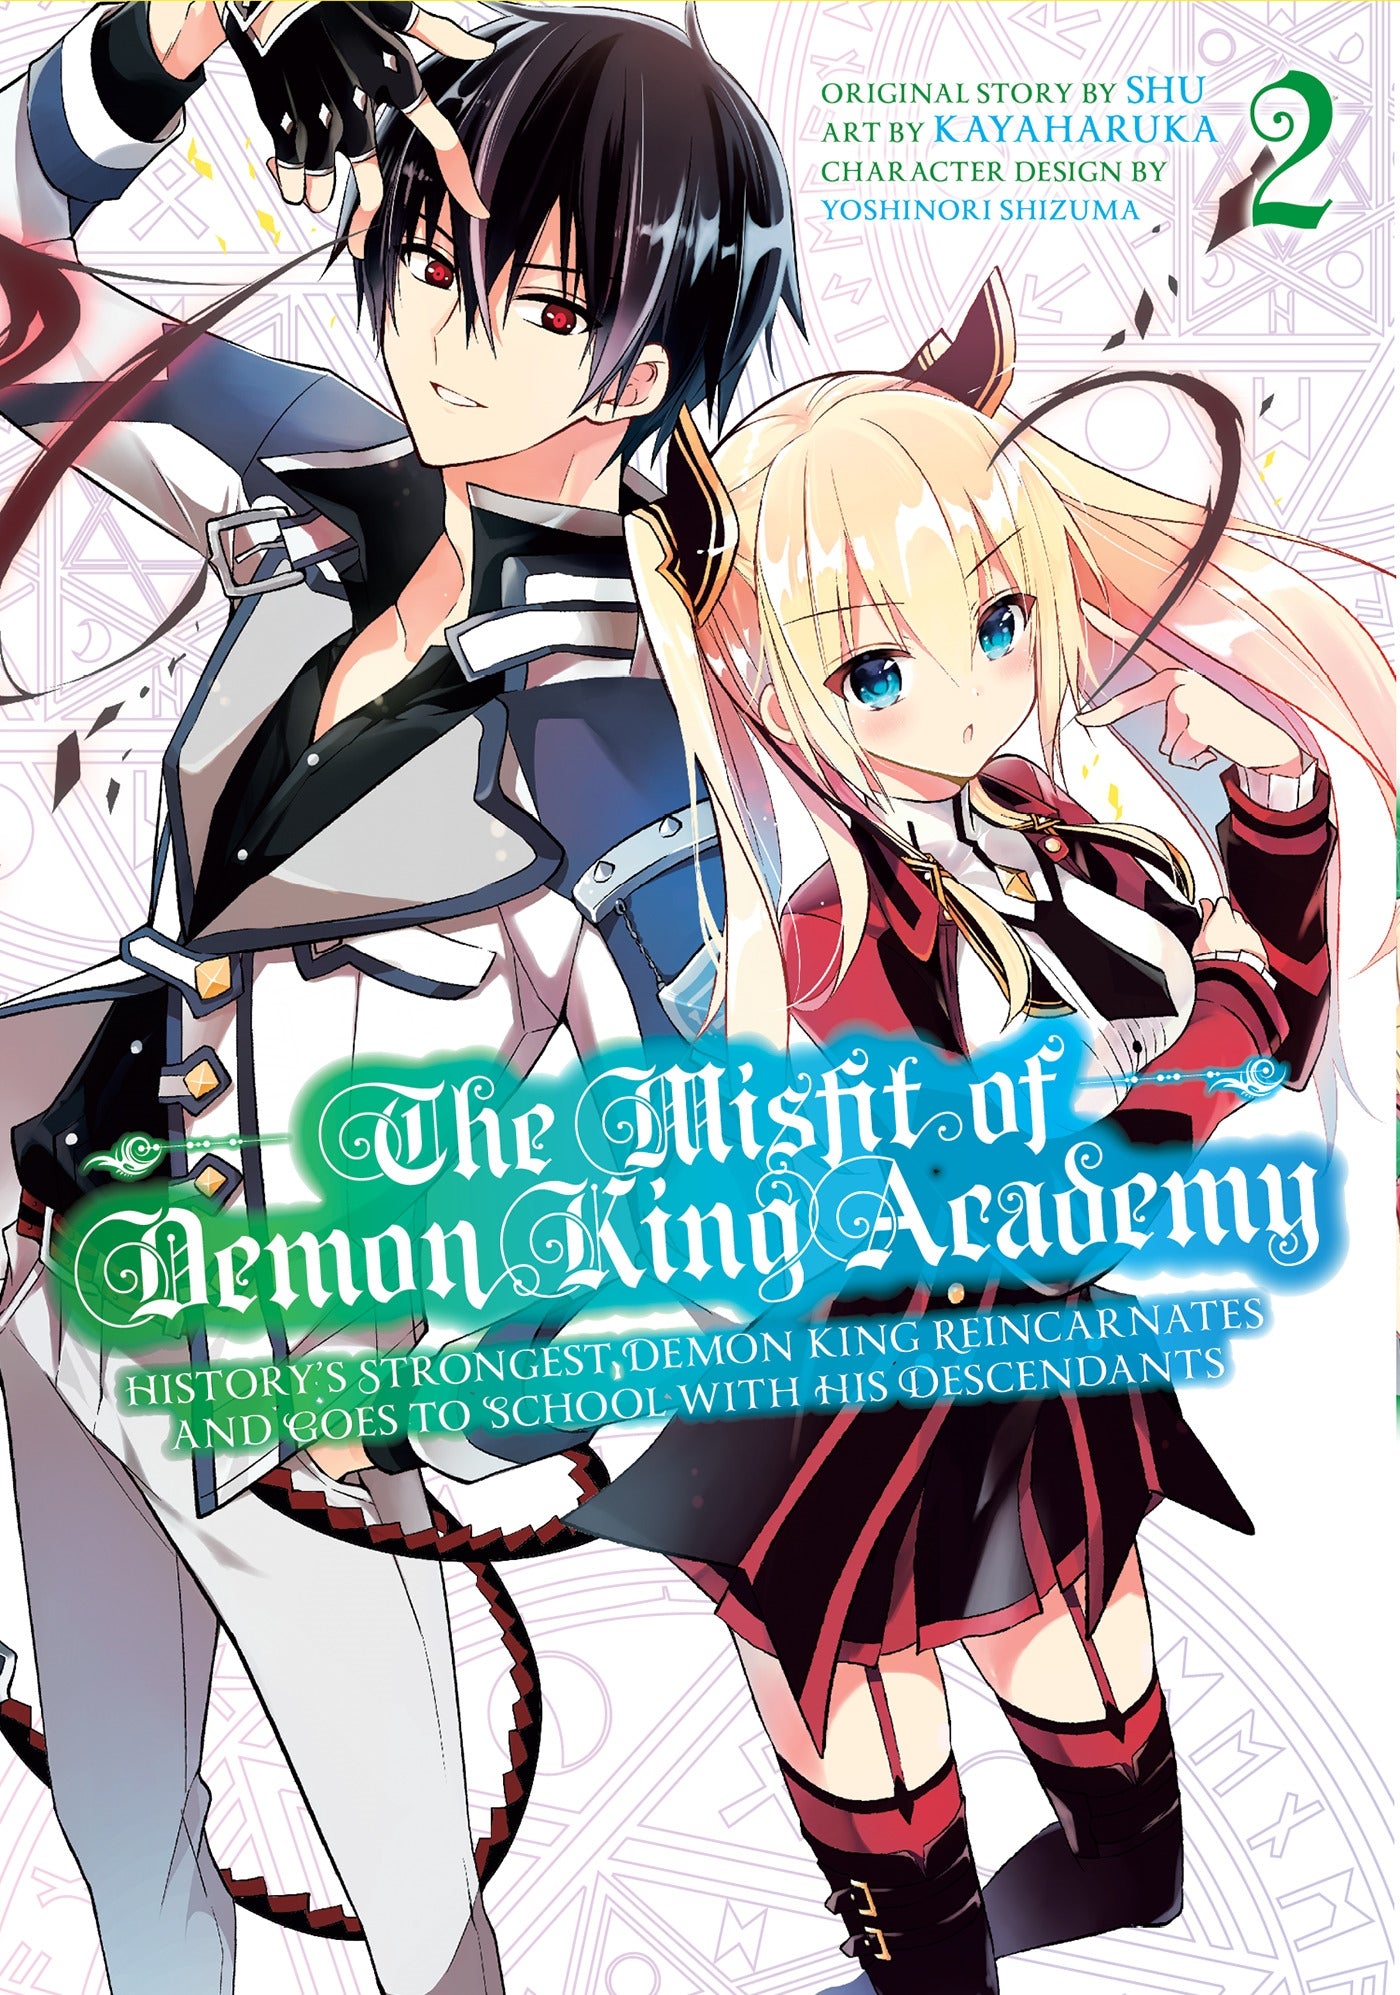 The Misfit of Demon King Academy 02 : History's Strongest Demon King Reincarnates and Goes to School with His Descendants - Manga Warehouse